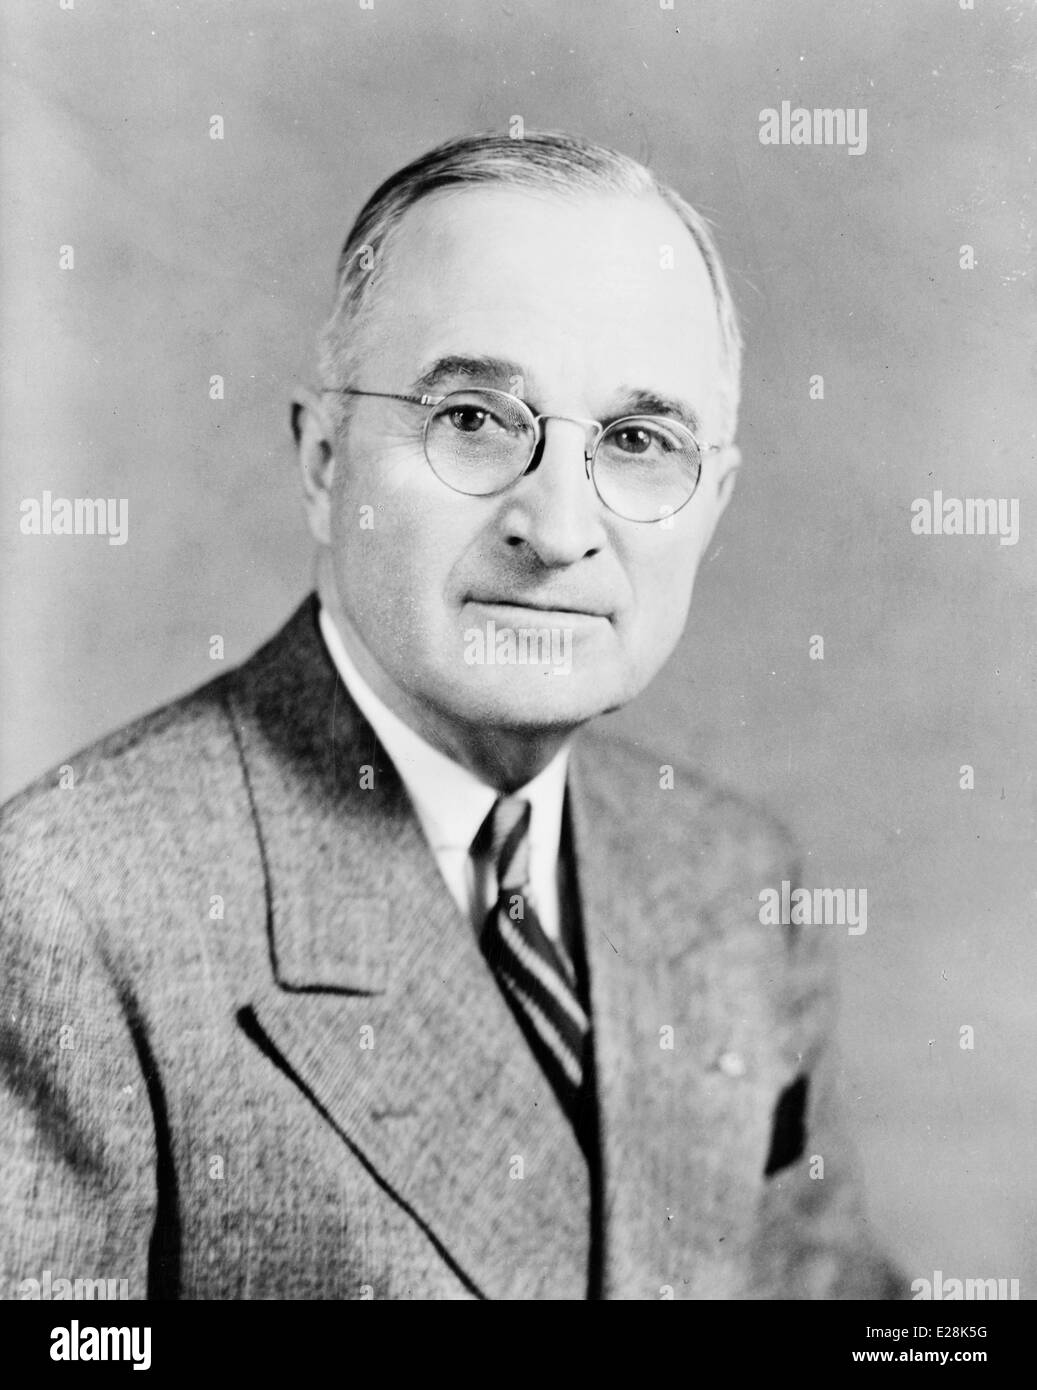 Harry S. Truman, 33rd President of the United States of America Stock Photo